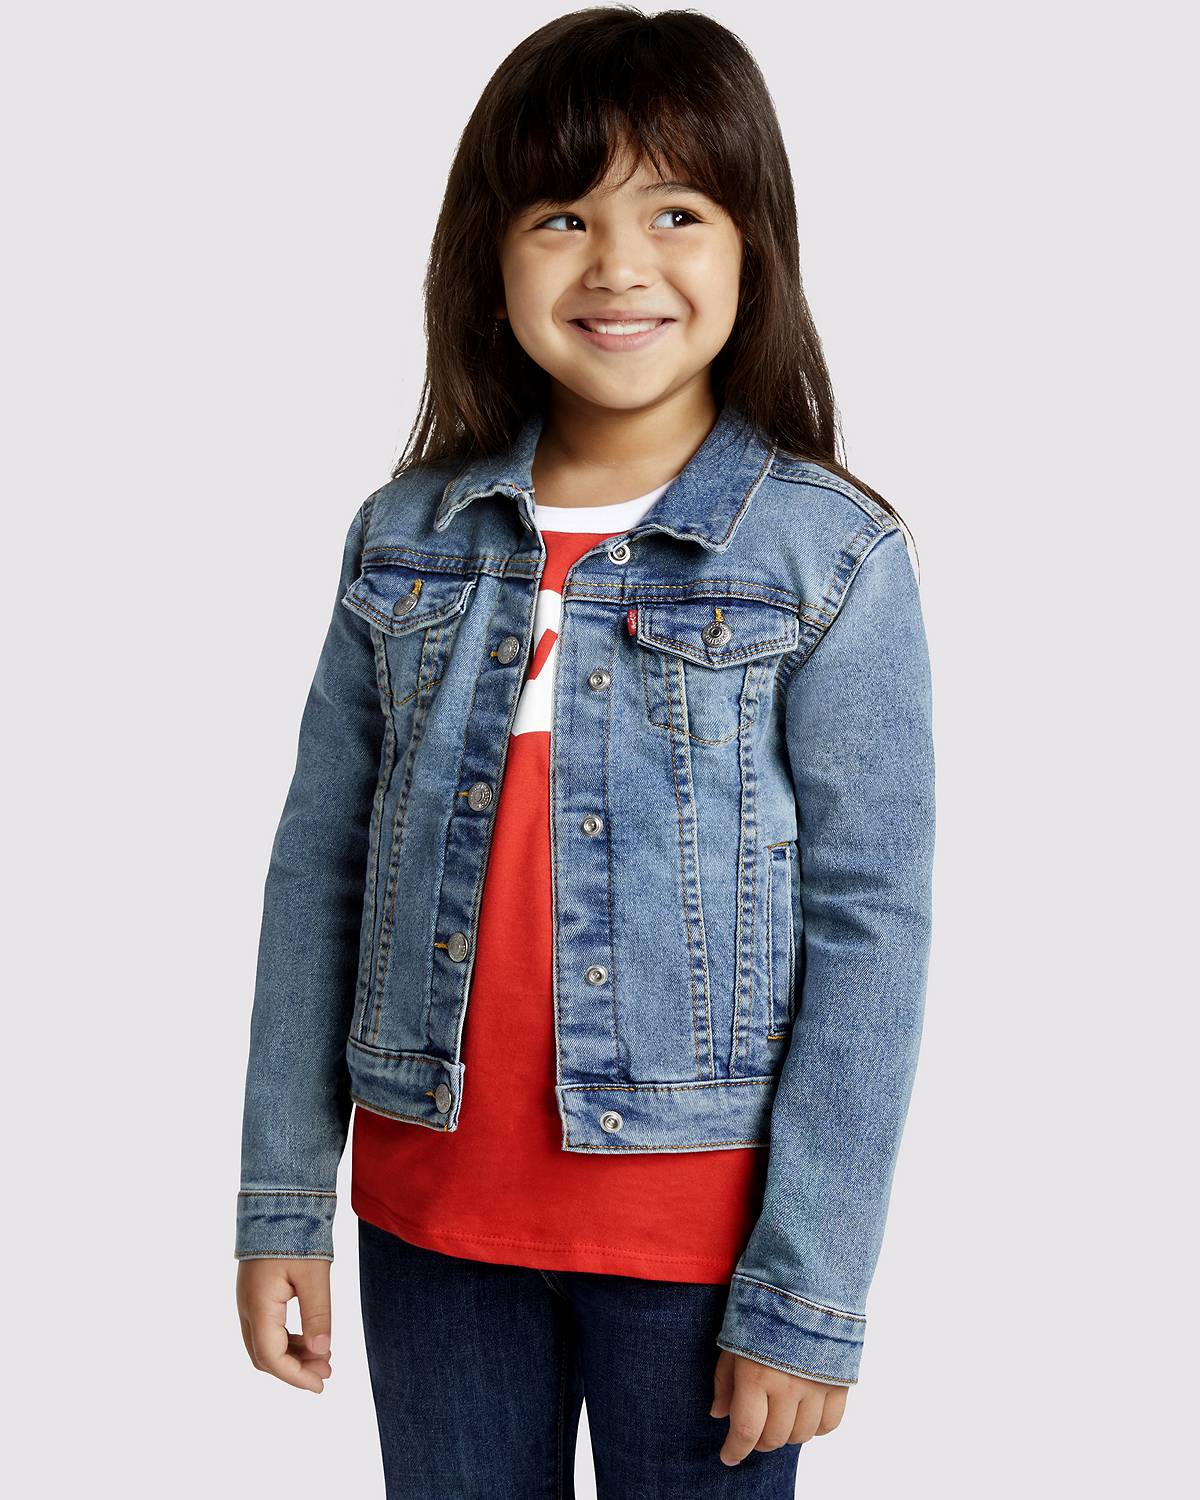 Clothes for Girls - Shop Cute Shirts, Jeans, Shorts & More